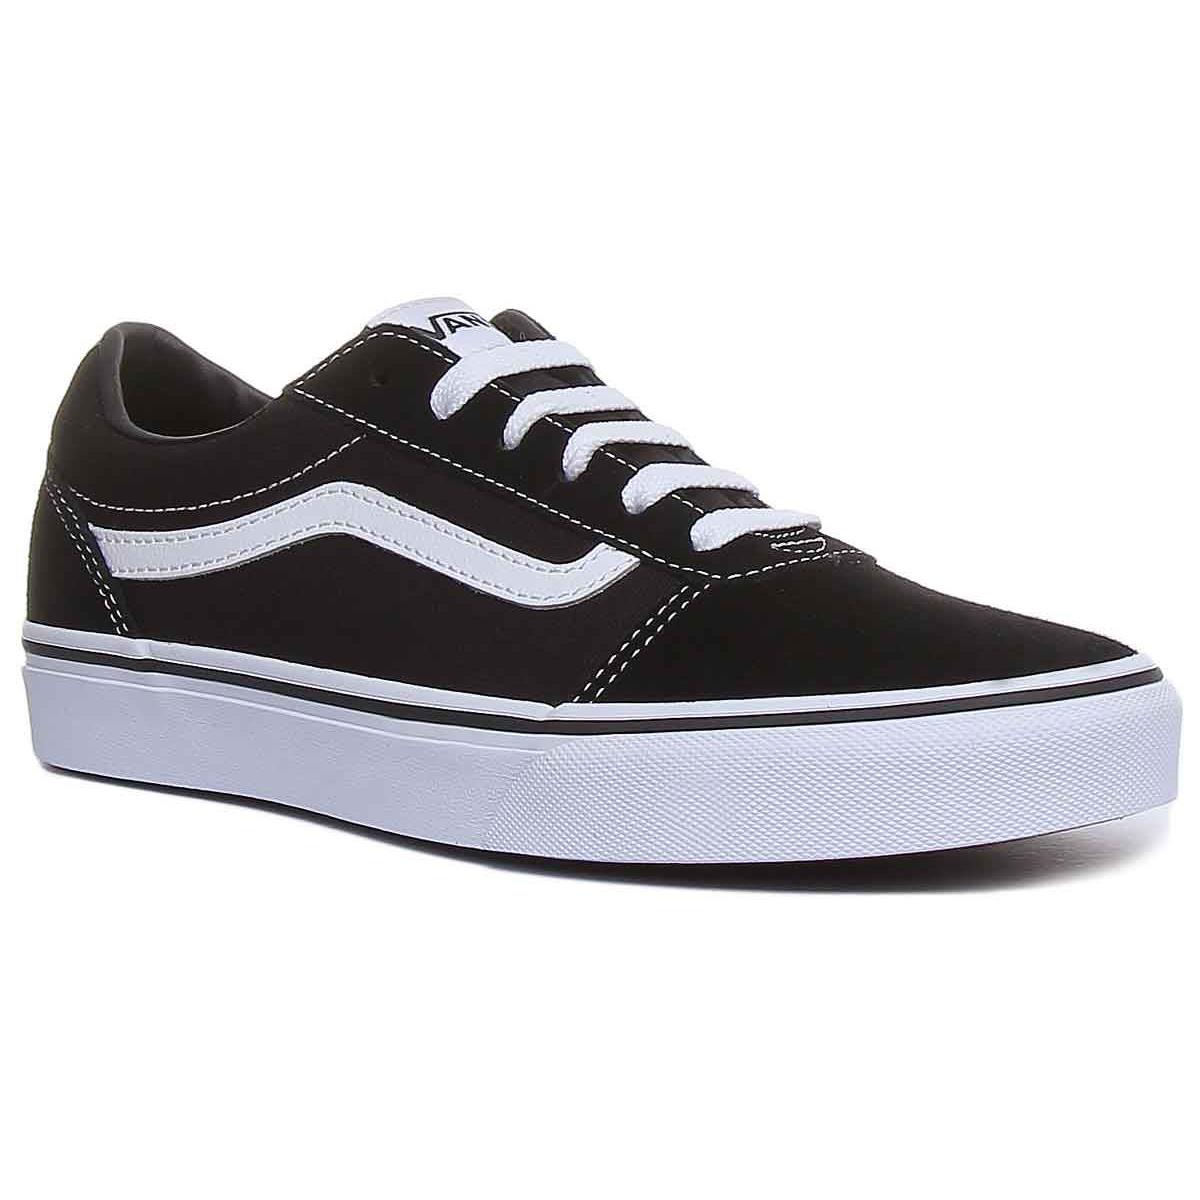 Vans Ward You Youths Lace Up Athletic Sneakers In Black White Size US 2 - 6 BLACK WHITE